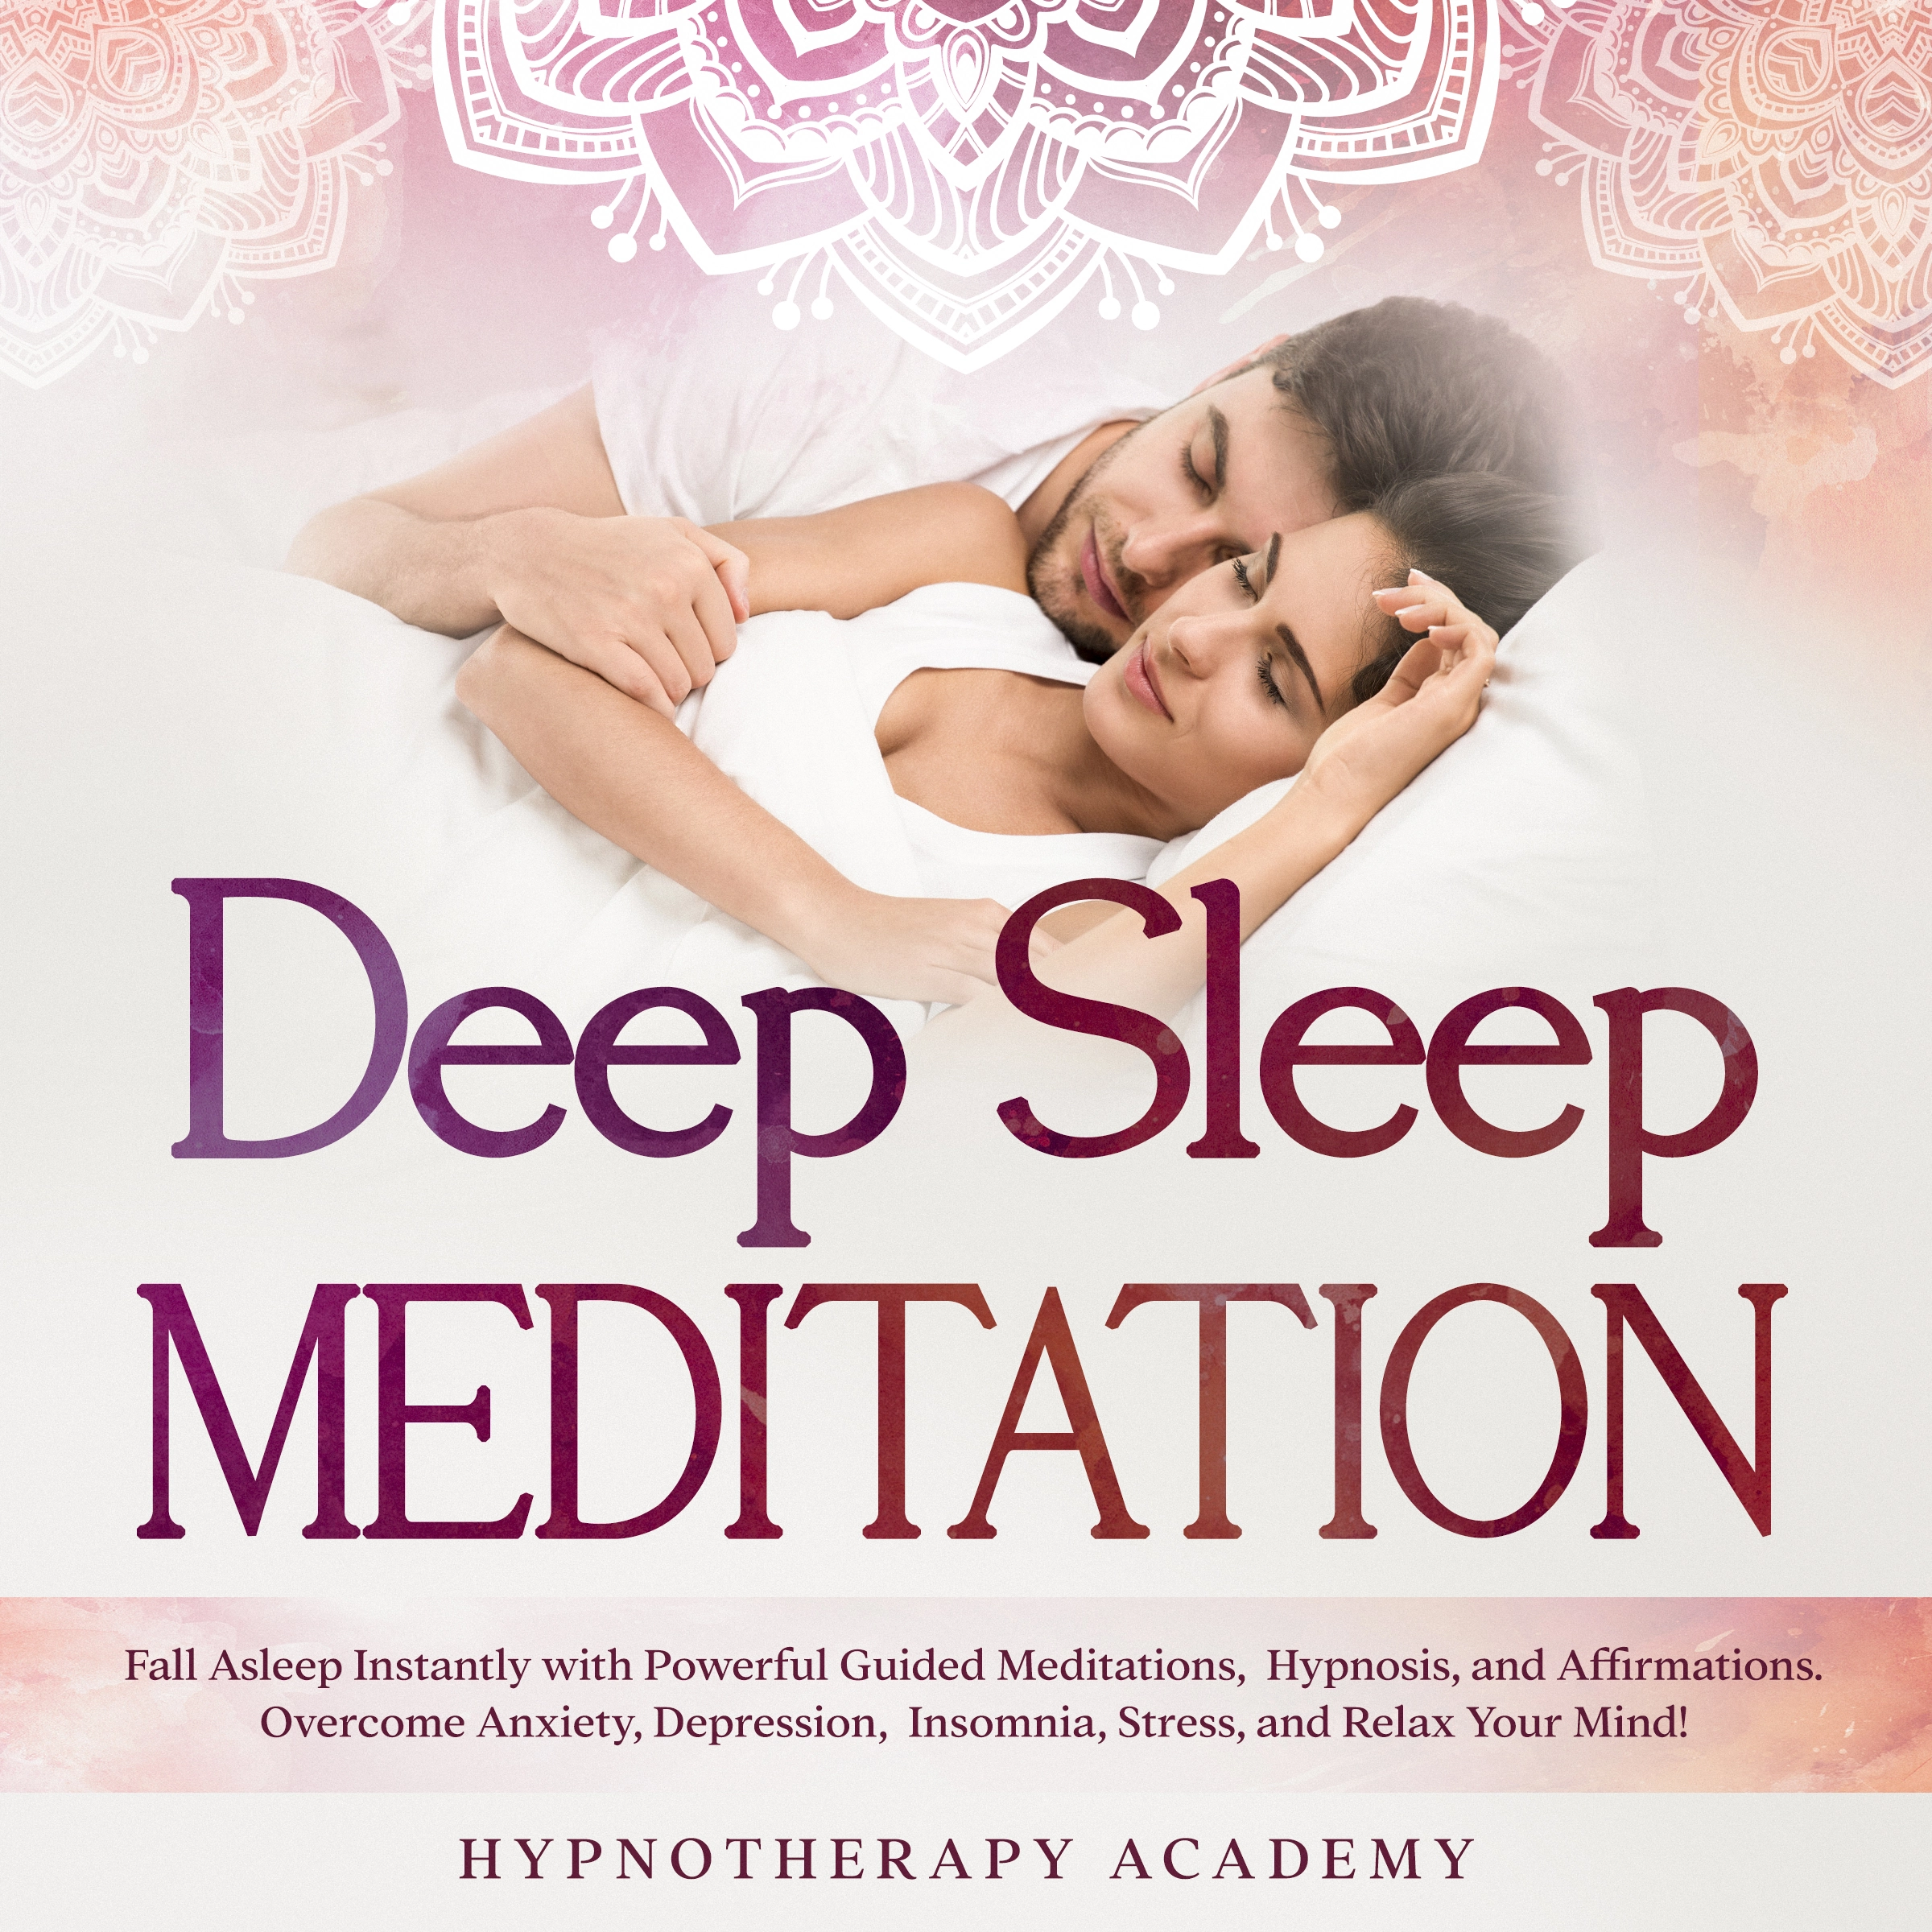 Deep Sleep Meditation: Fall Asleep Instantly with Powerful Guided Meditations, Hypnosis, and Affirmations. Overcome Anxiety, Depression, Insomnia, Stress, and Relax Your Mind! by Hypnotherapy Academy Audiobook